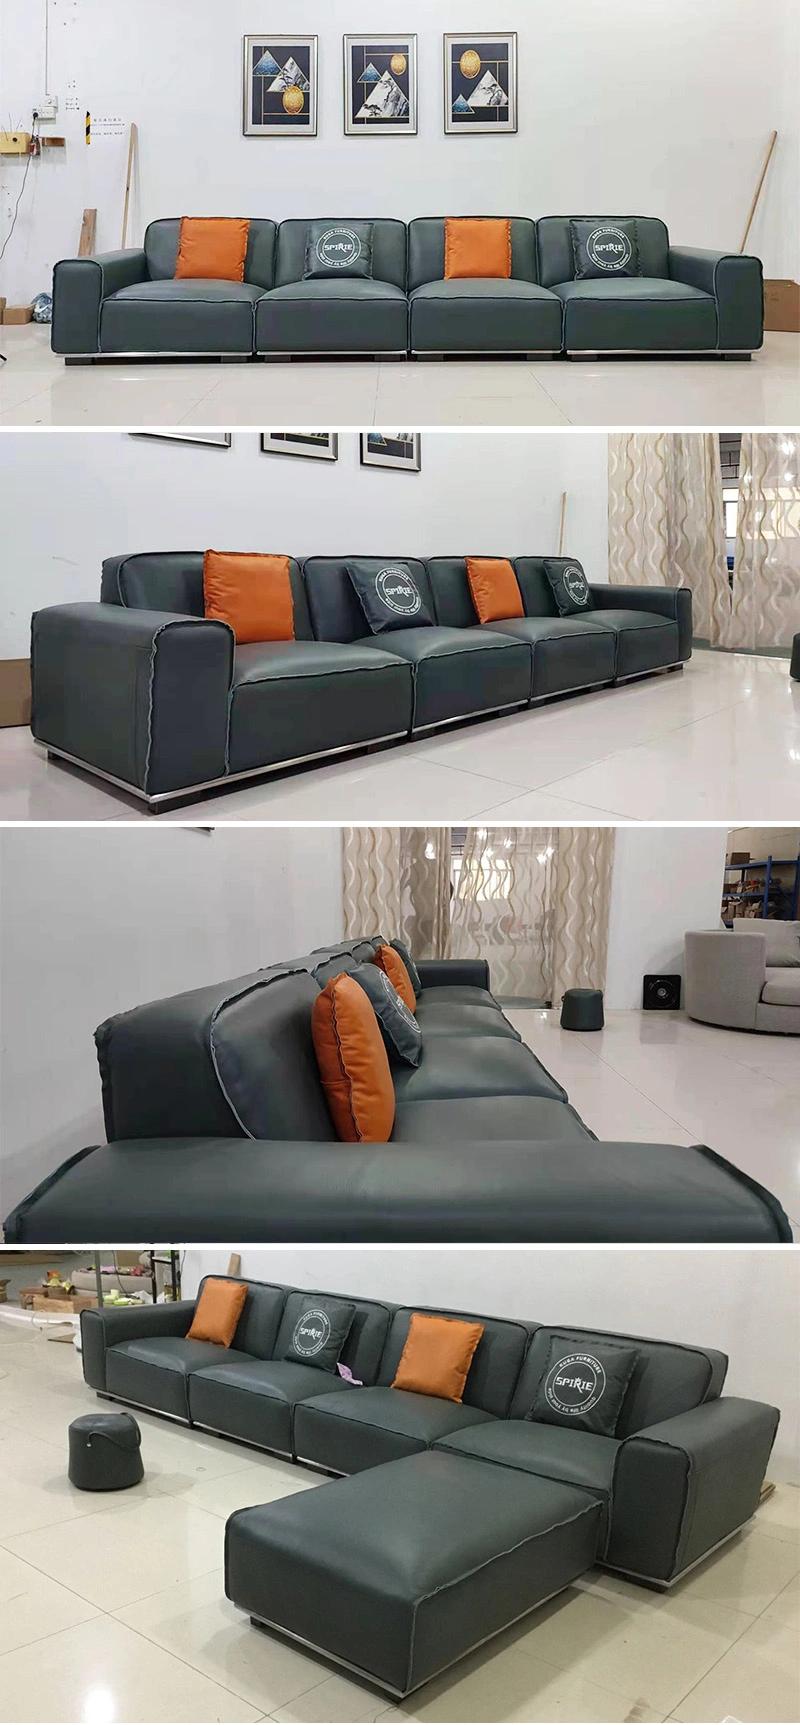 Leisure Fabric Couch Modern Home Leather Sofa for Living Room Furniture 2827